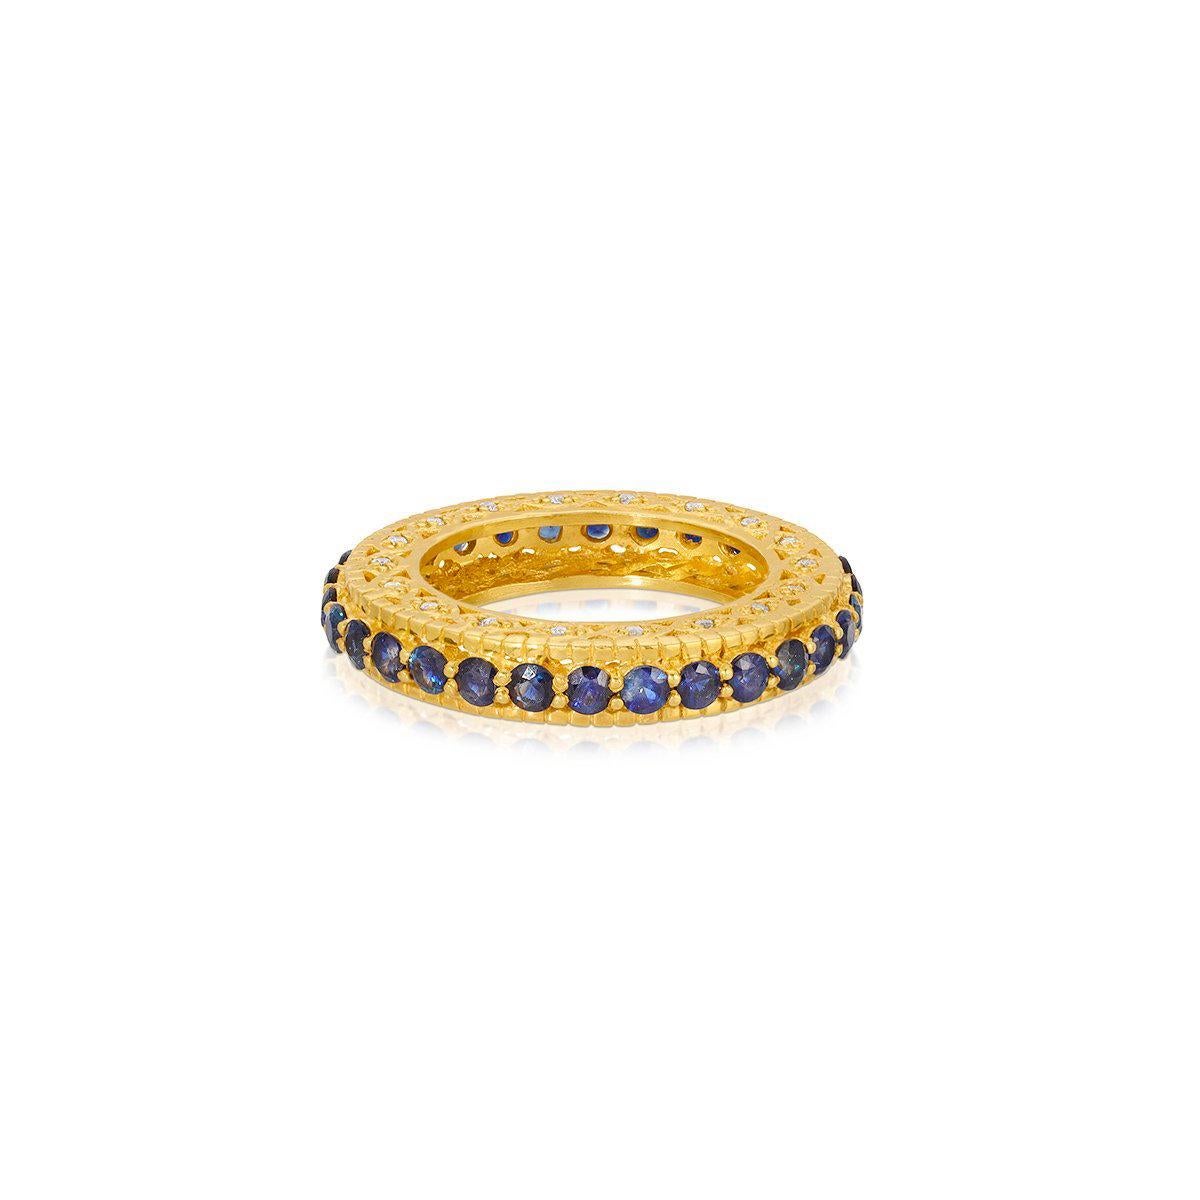 The Mara Sapphire Eternity band... fully set with sparkling Sapphires featuring an opulent filigree depth studded with Diamonds. 

- Natural Sapphires weight approx 2.46 Carats.
- White Diamonds weight approx .36 Carats.
- Set in 22 Karat Gold